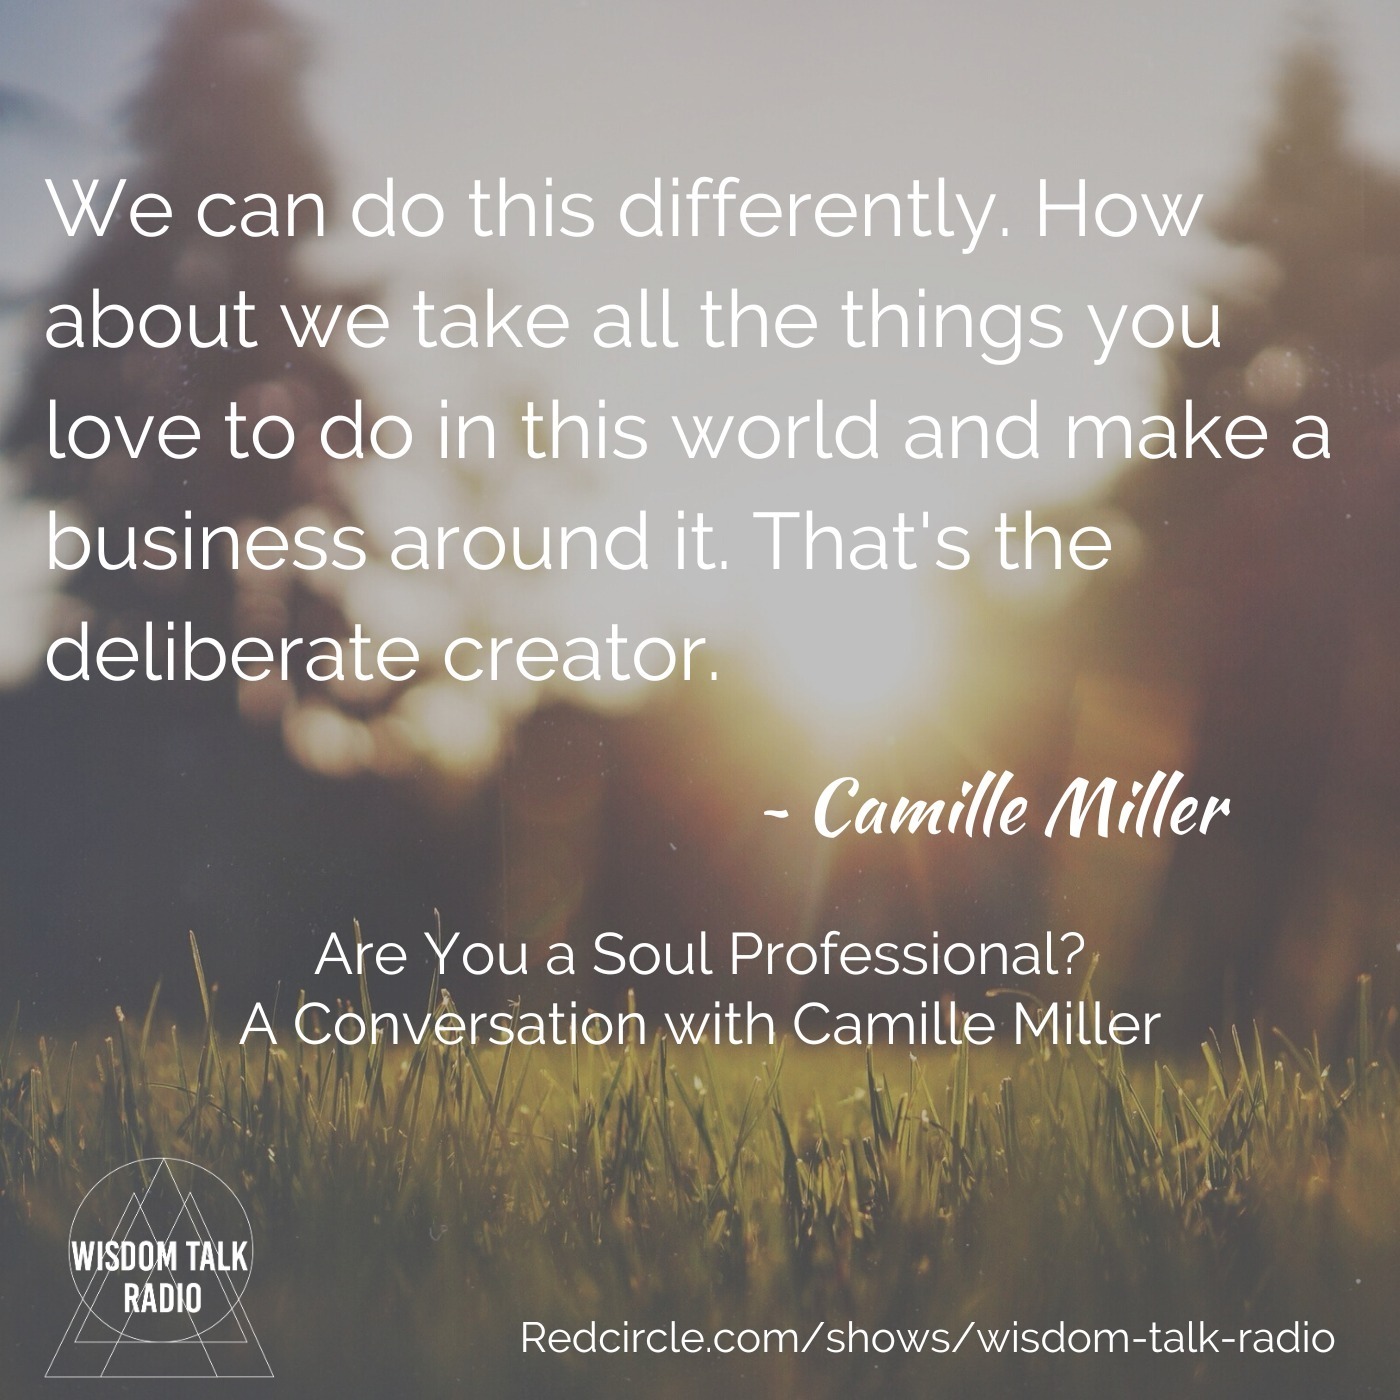 Are You a Soul Professional? A conversation with Camille Miller